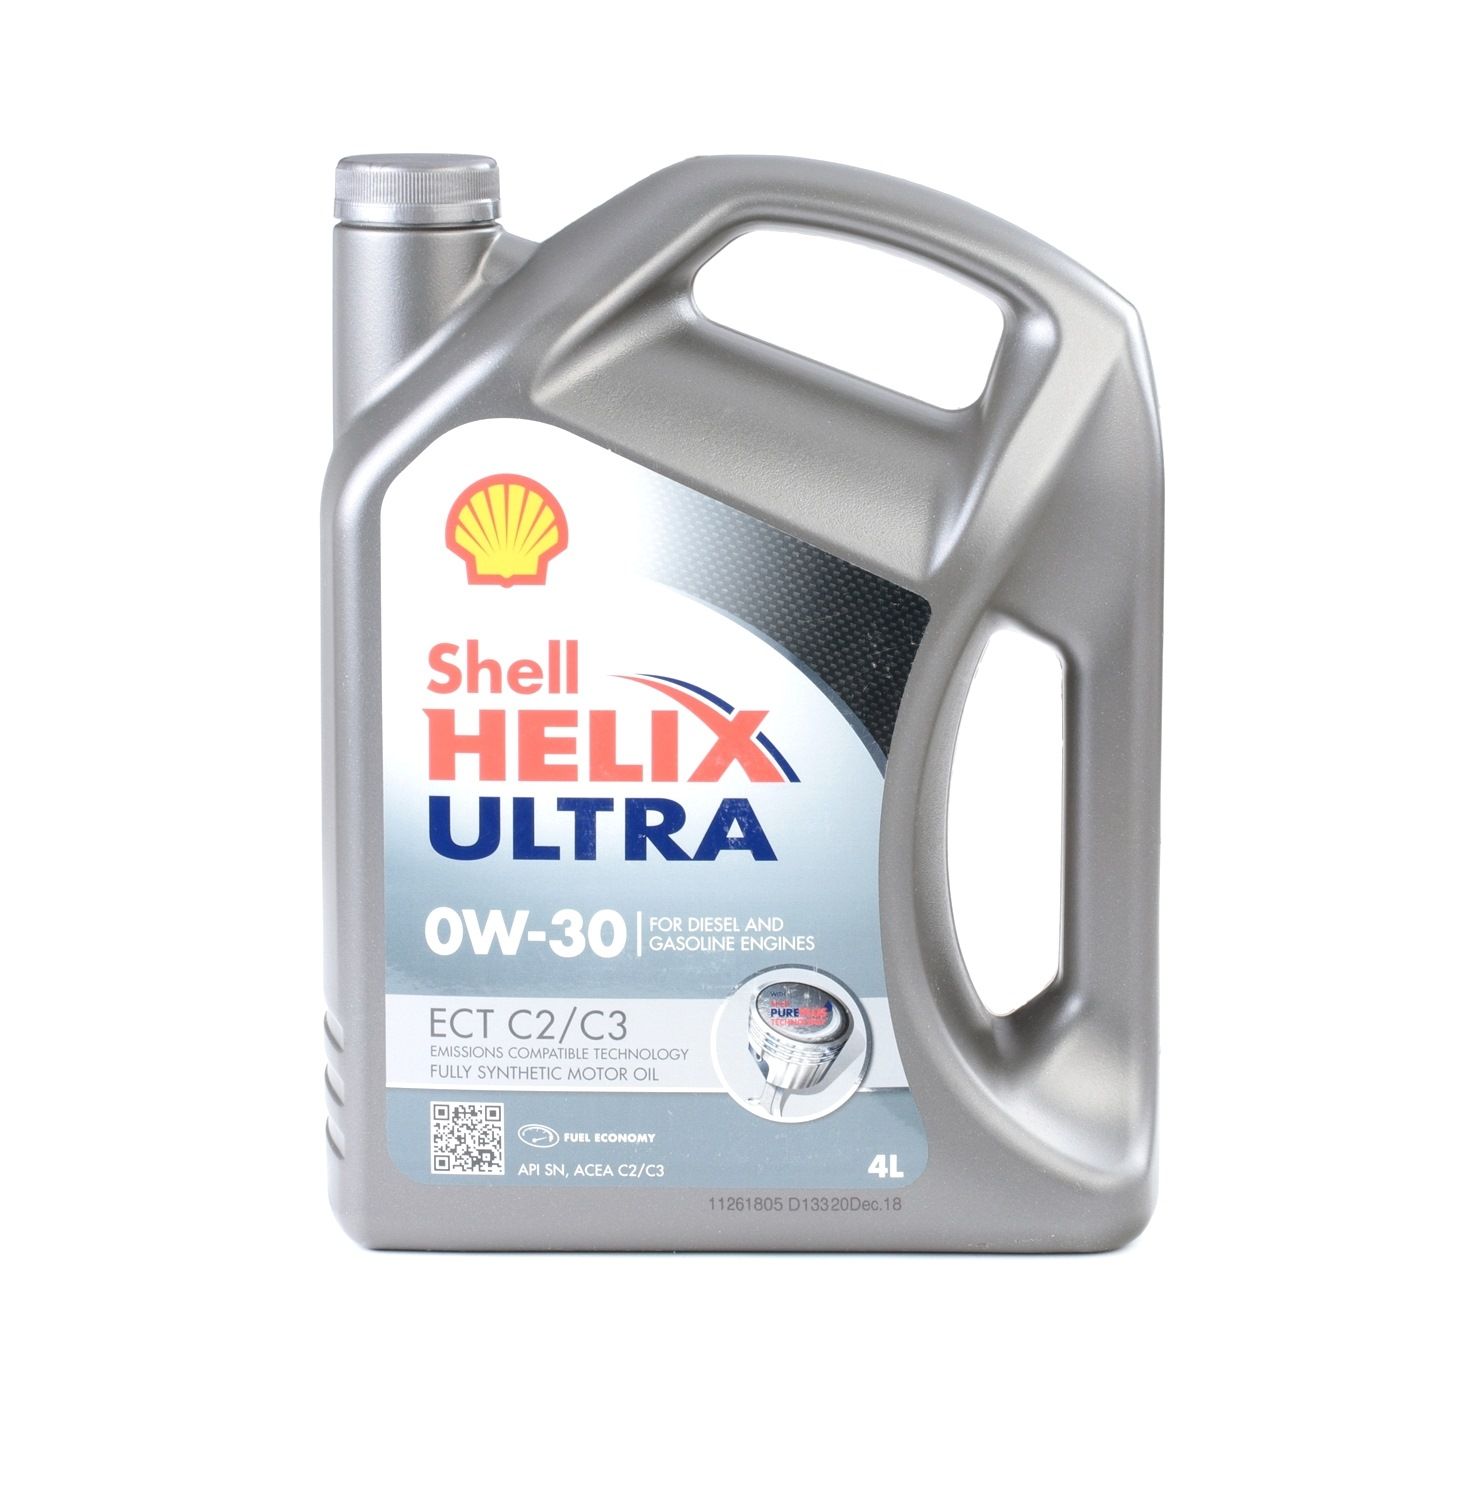 Buy Engine oil SHELL petrol 550046306 Helix, Ultra ECT C2/C3 0W-30, 4l, Synthetic Oil